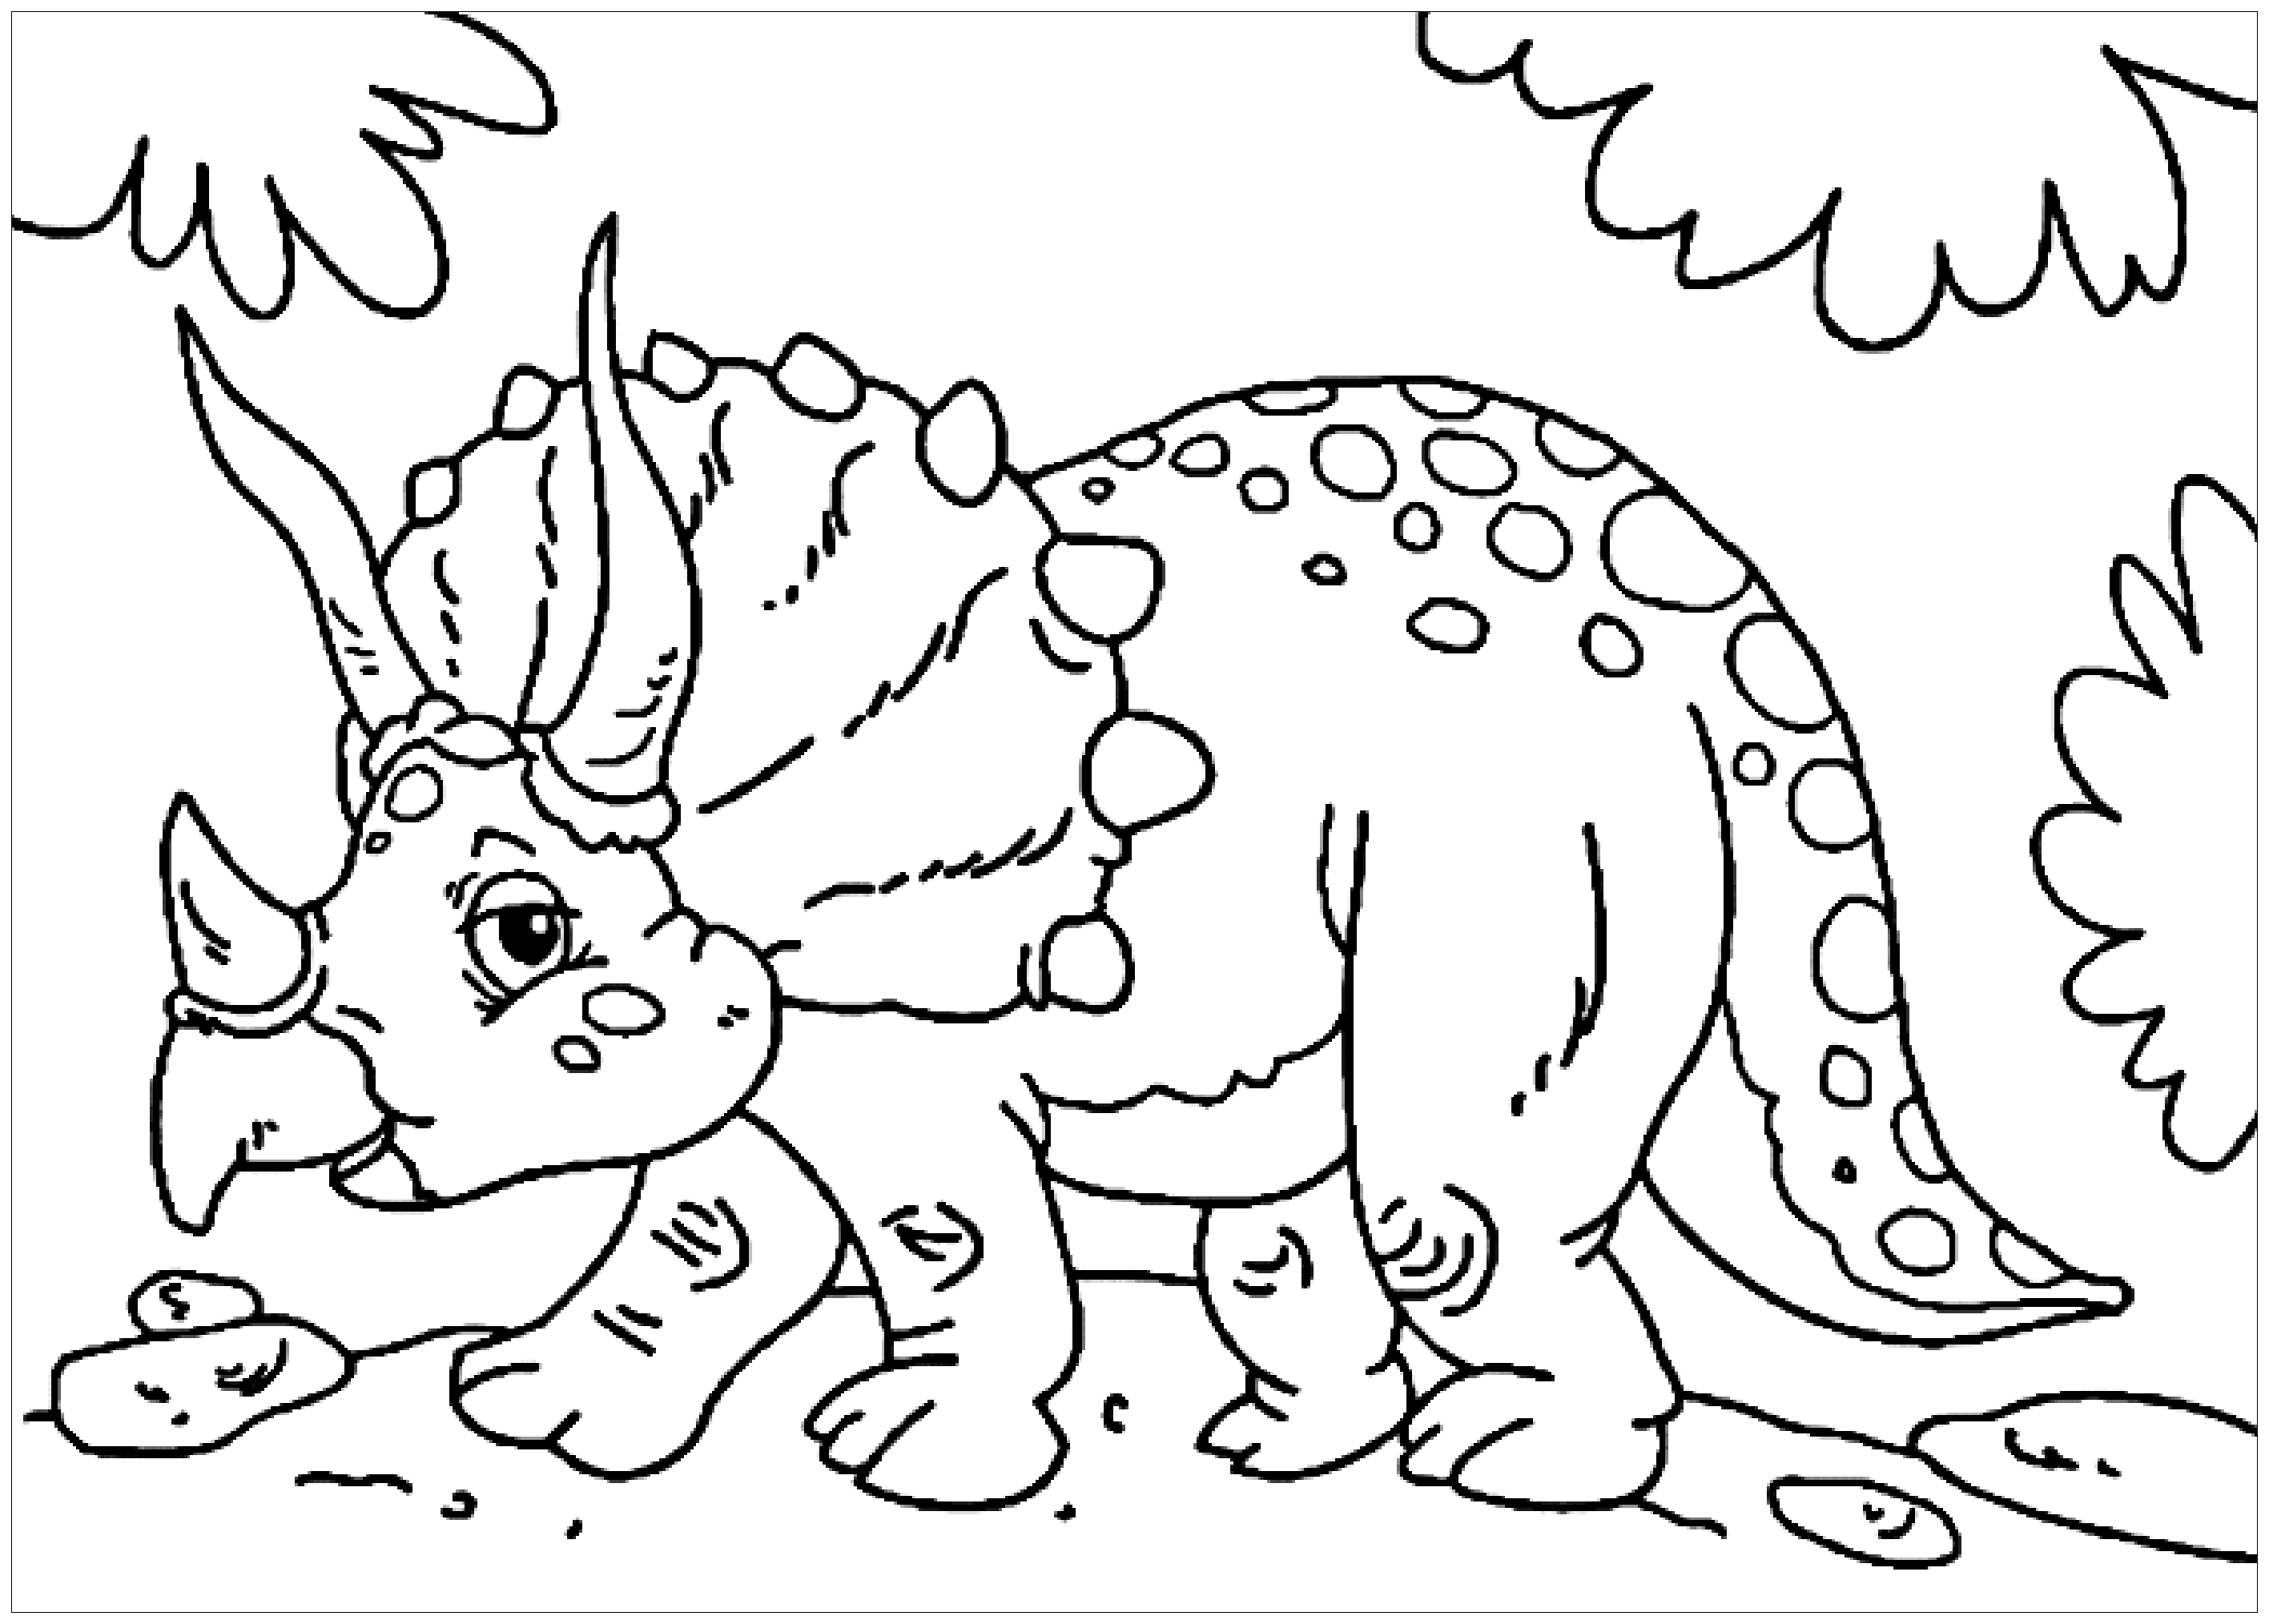 Dinosaurs for children : Triceratops - Dinosaurs Kids Coloring Pages